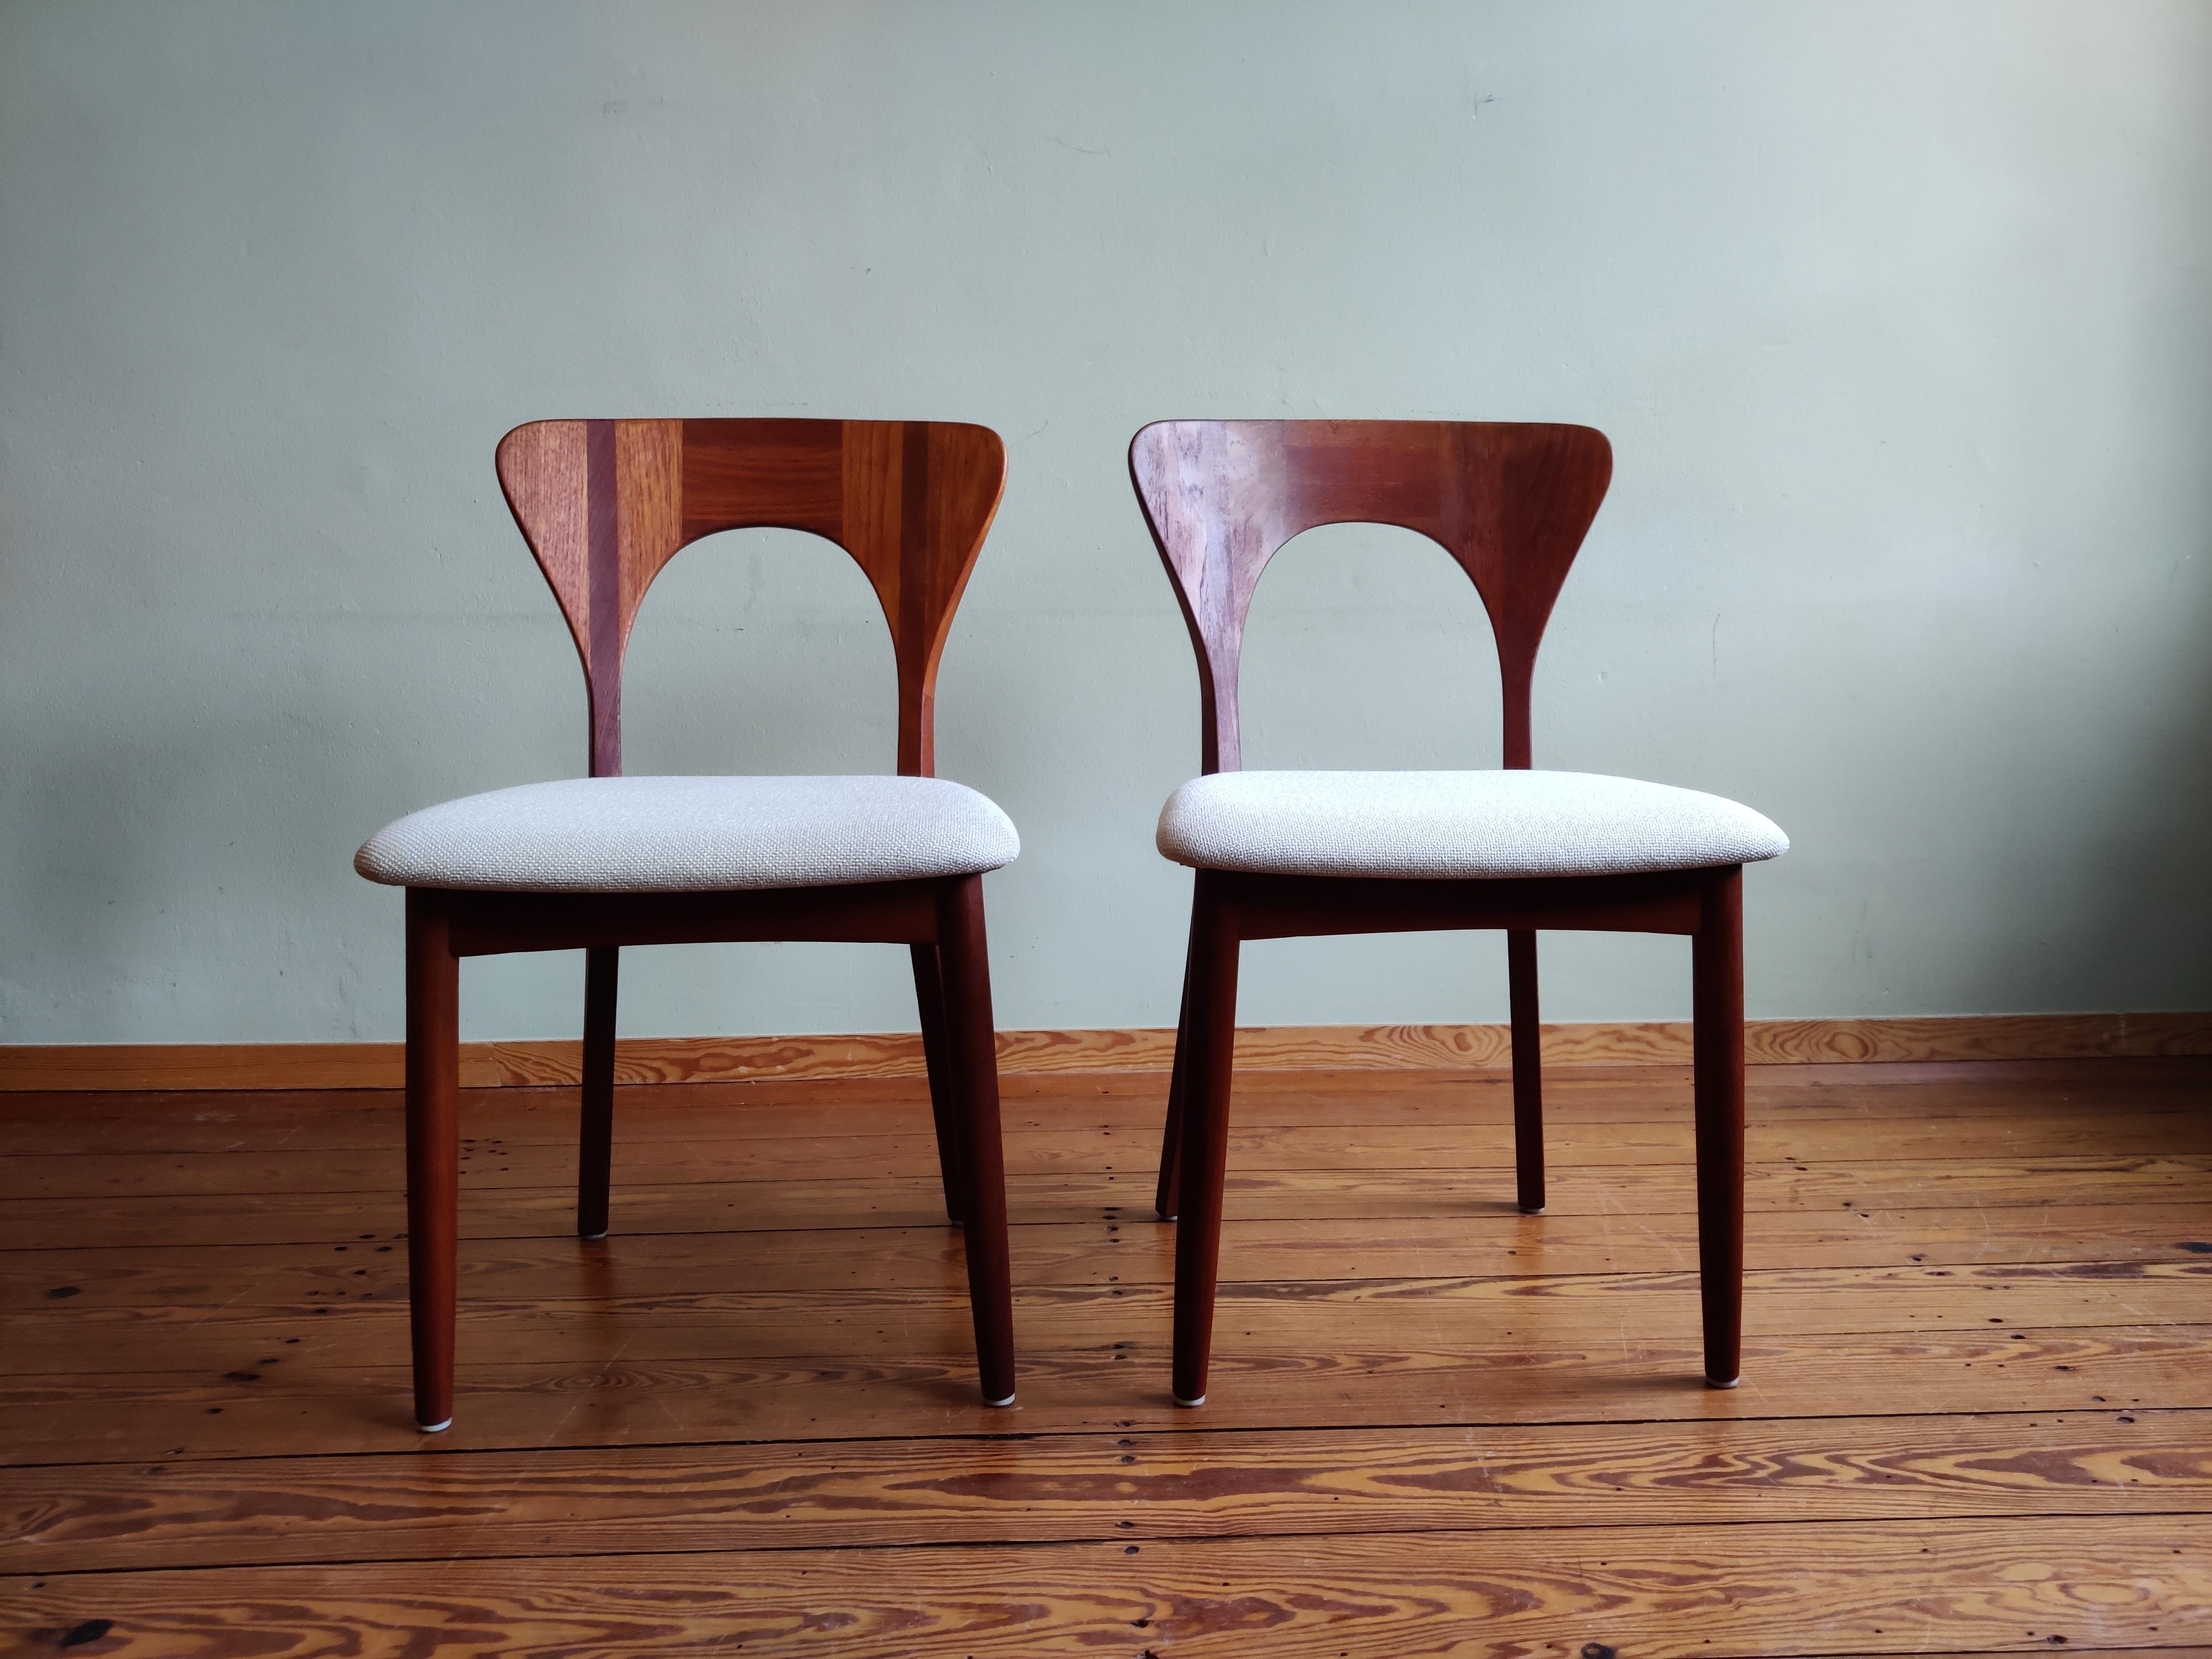 Set of beautiful danish dining chairs by Niels Koefoed for Koefoeds Hornslet. 

Due to the age, there are minor signs of use and fixes, but nothing that shows on first sight or affects functionality. One chair was additionally reinforced with